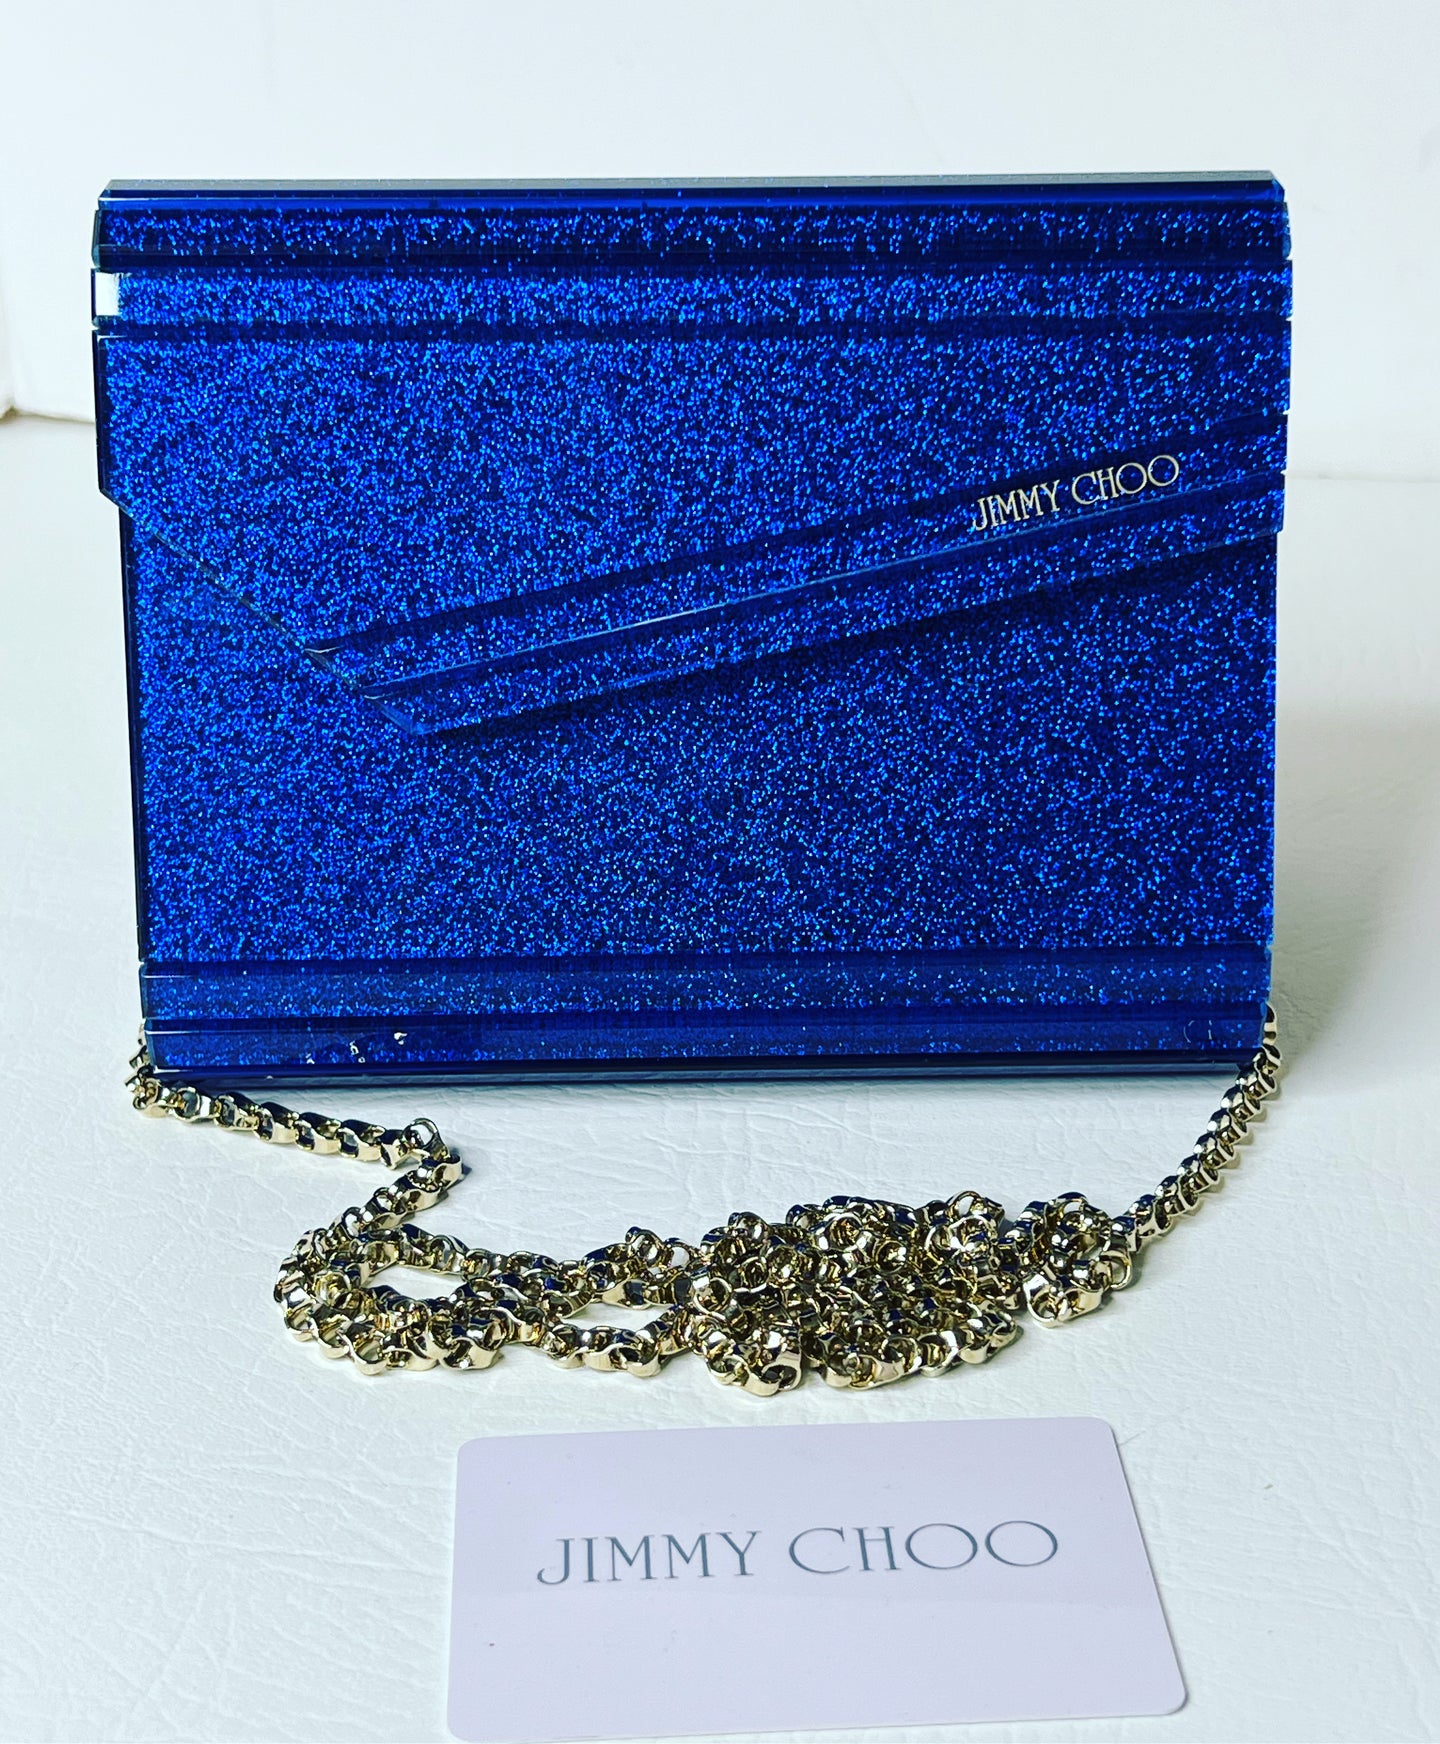 Jimmy Choo Acrylic Electric Blue Glitter Candy Clutch with Chain